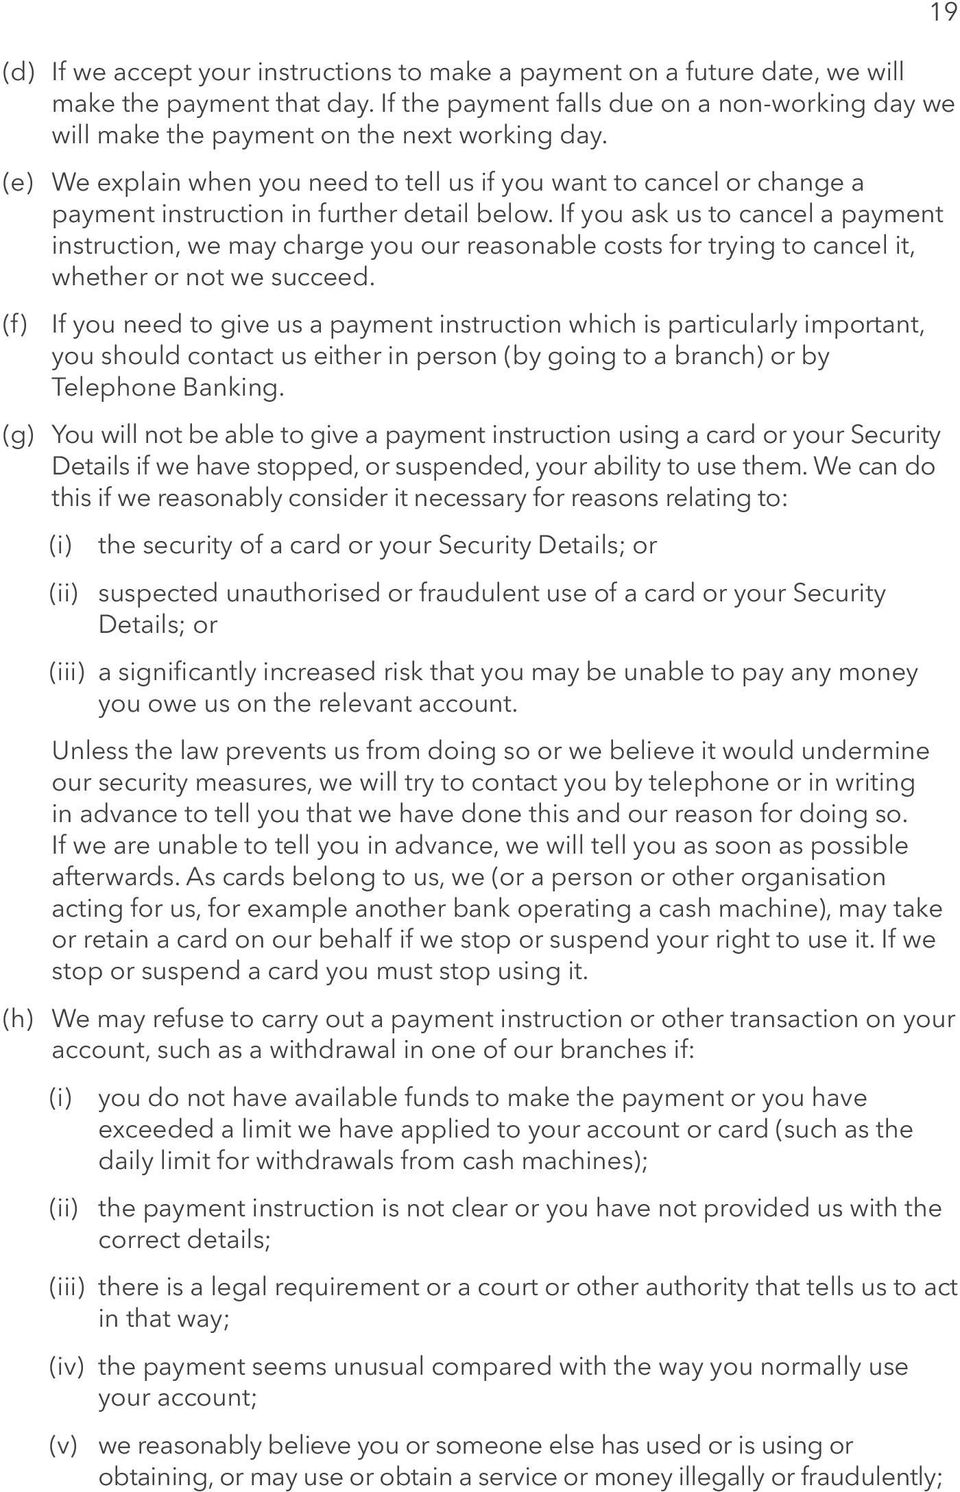 (e) We explain when you need to tell us if you want to cancel or change a payment instruction in further detail below.